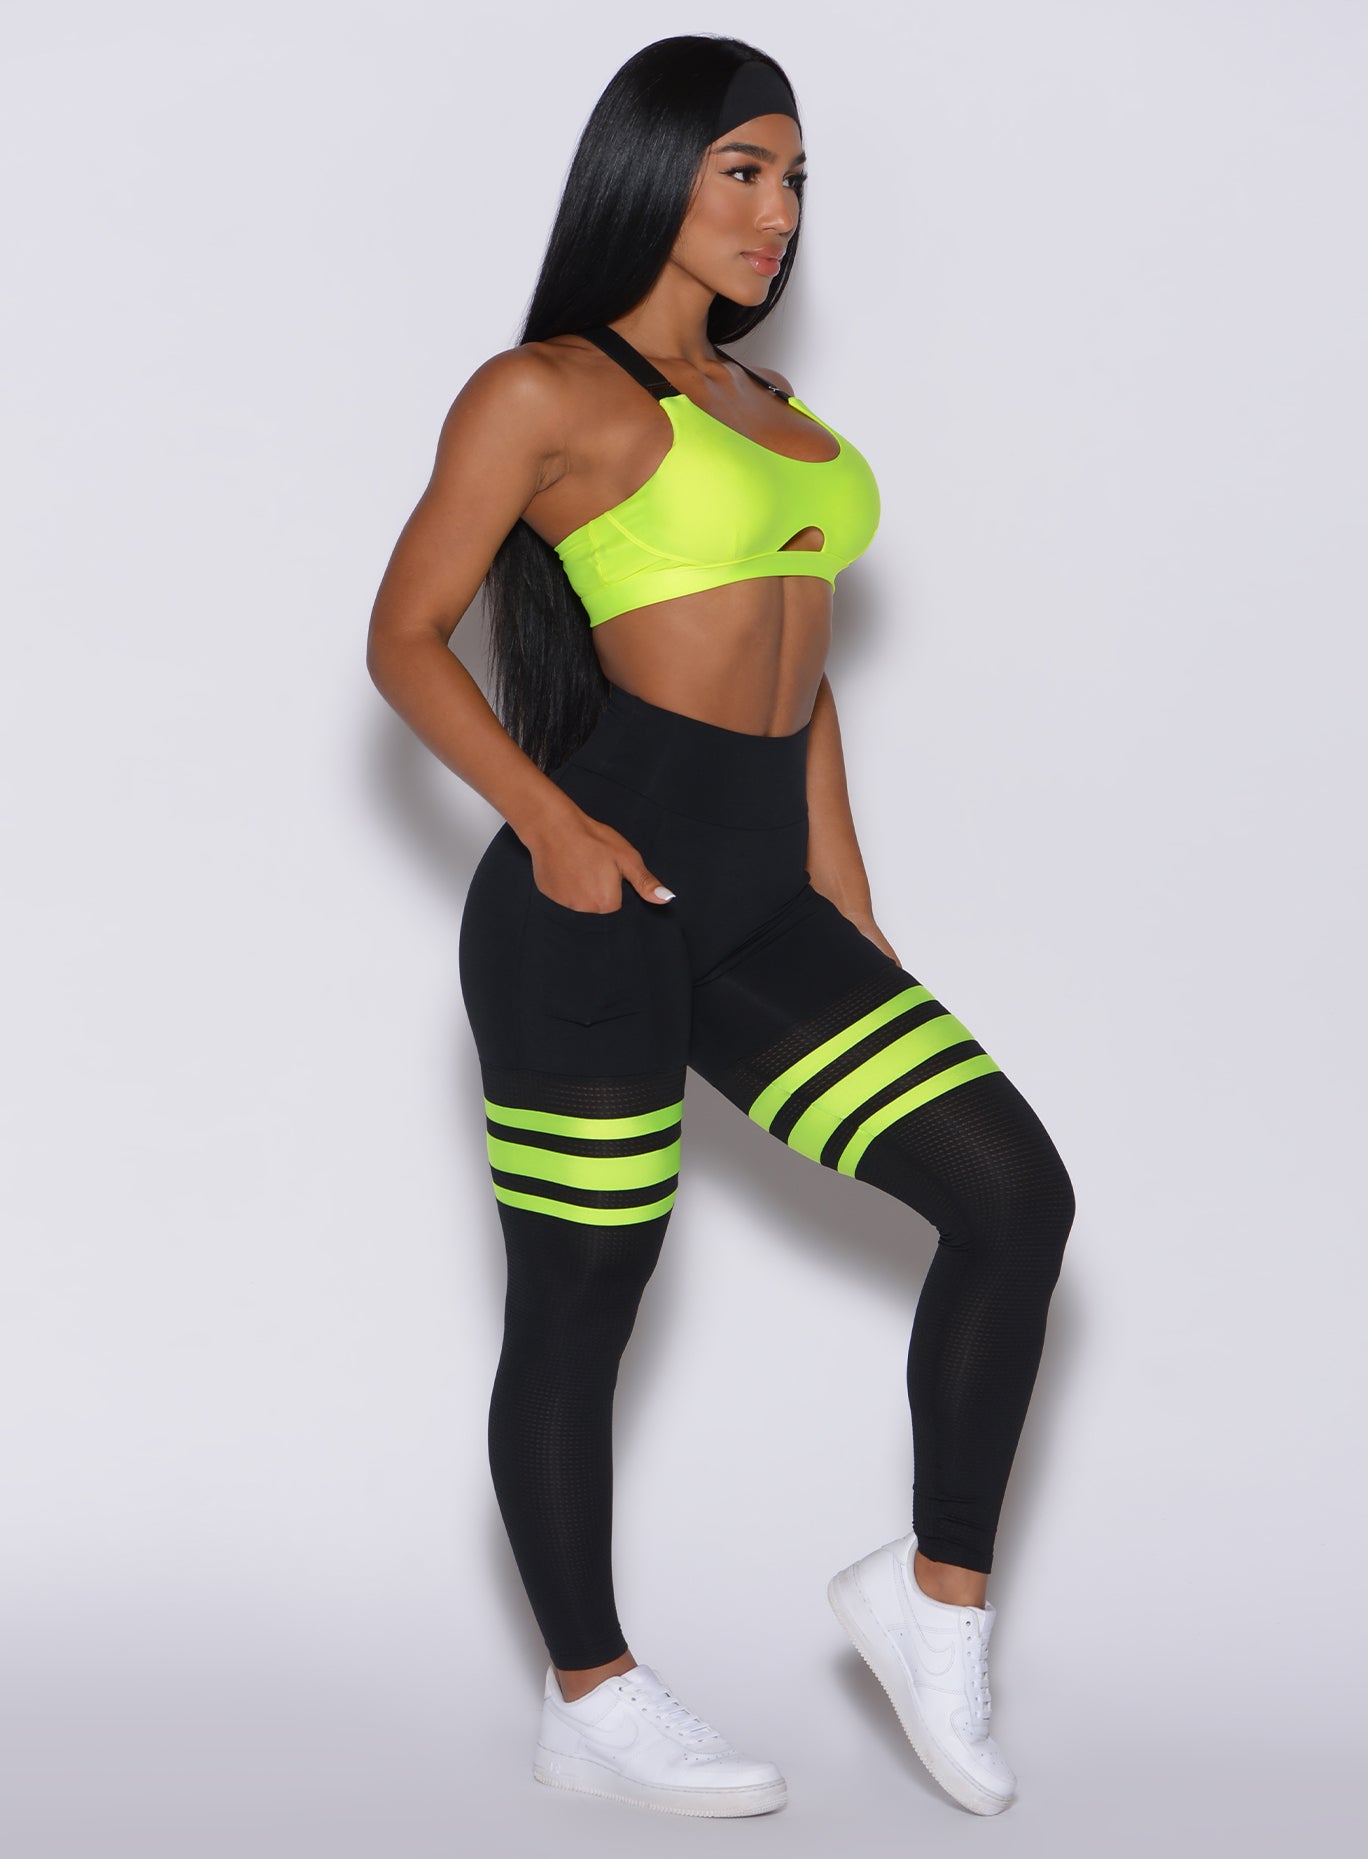 Right side profile view of a model wearing our scrunch thigh high in black with neon yellow stripes on the thighs and a matching sports bra